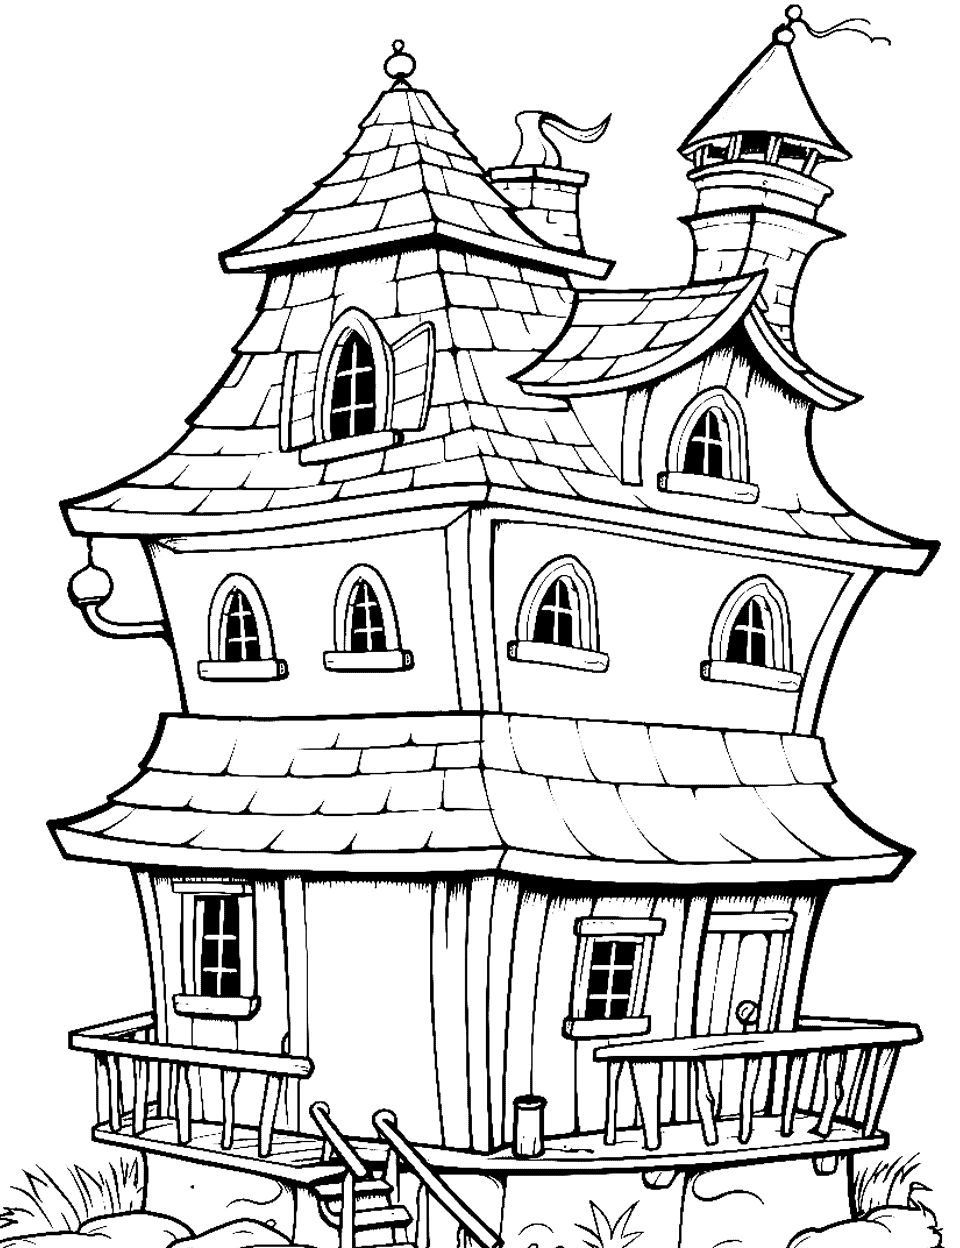 Adventurous Pirate House Coloring Page - A house-shaped uniquely dubbed pirate den for pirates to live in.